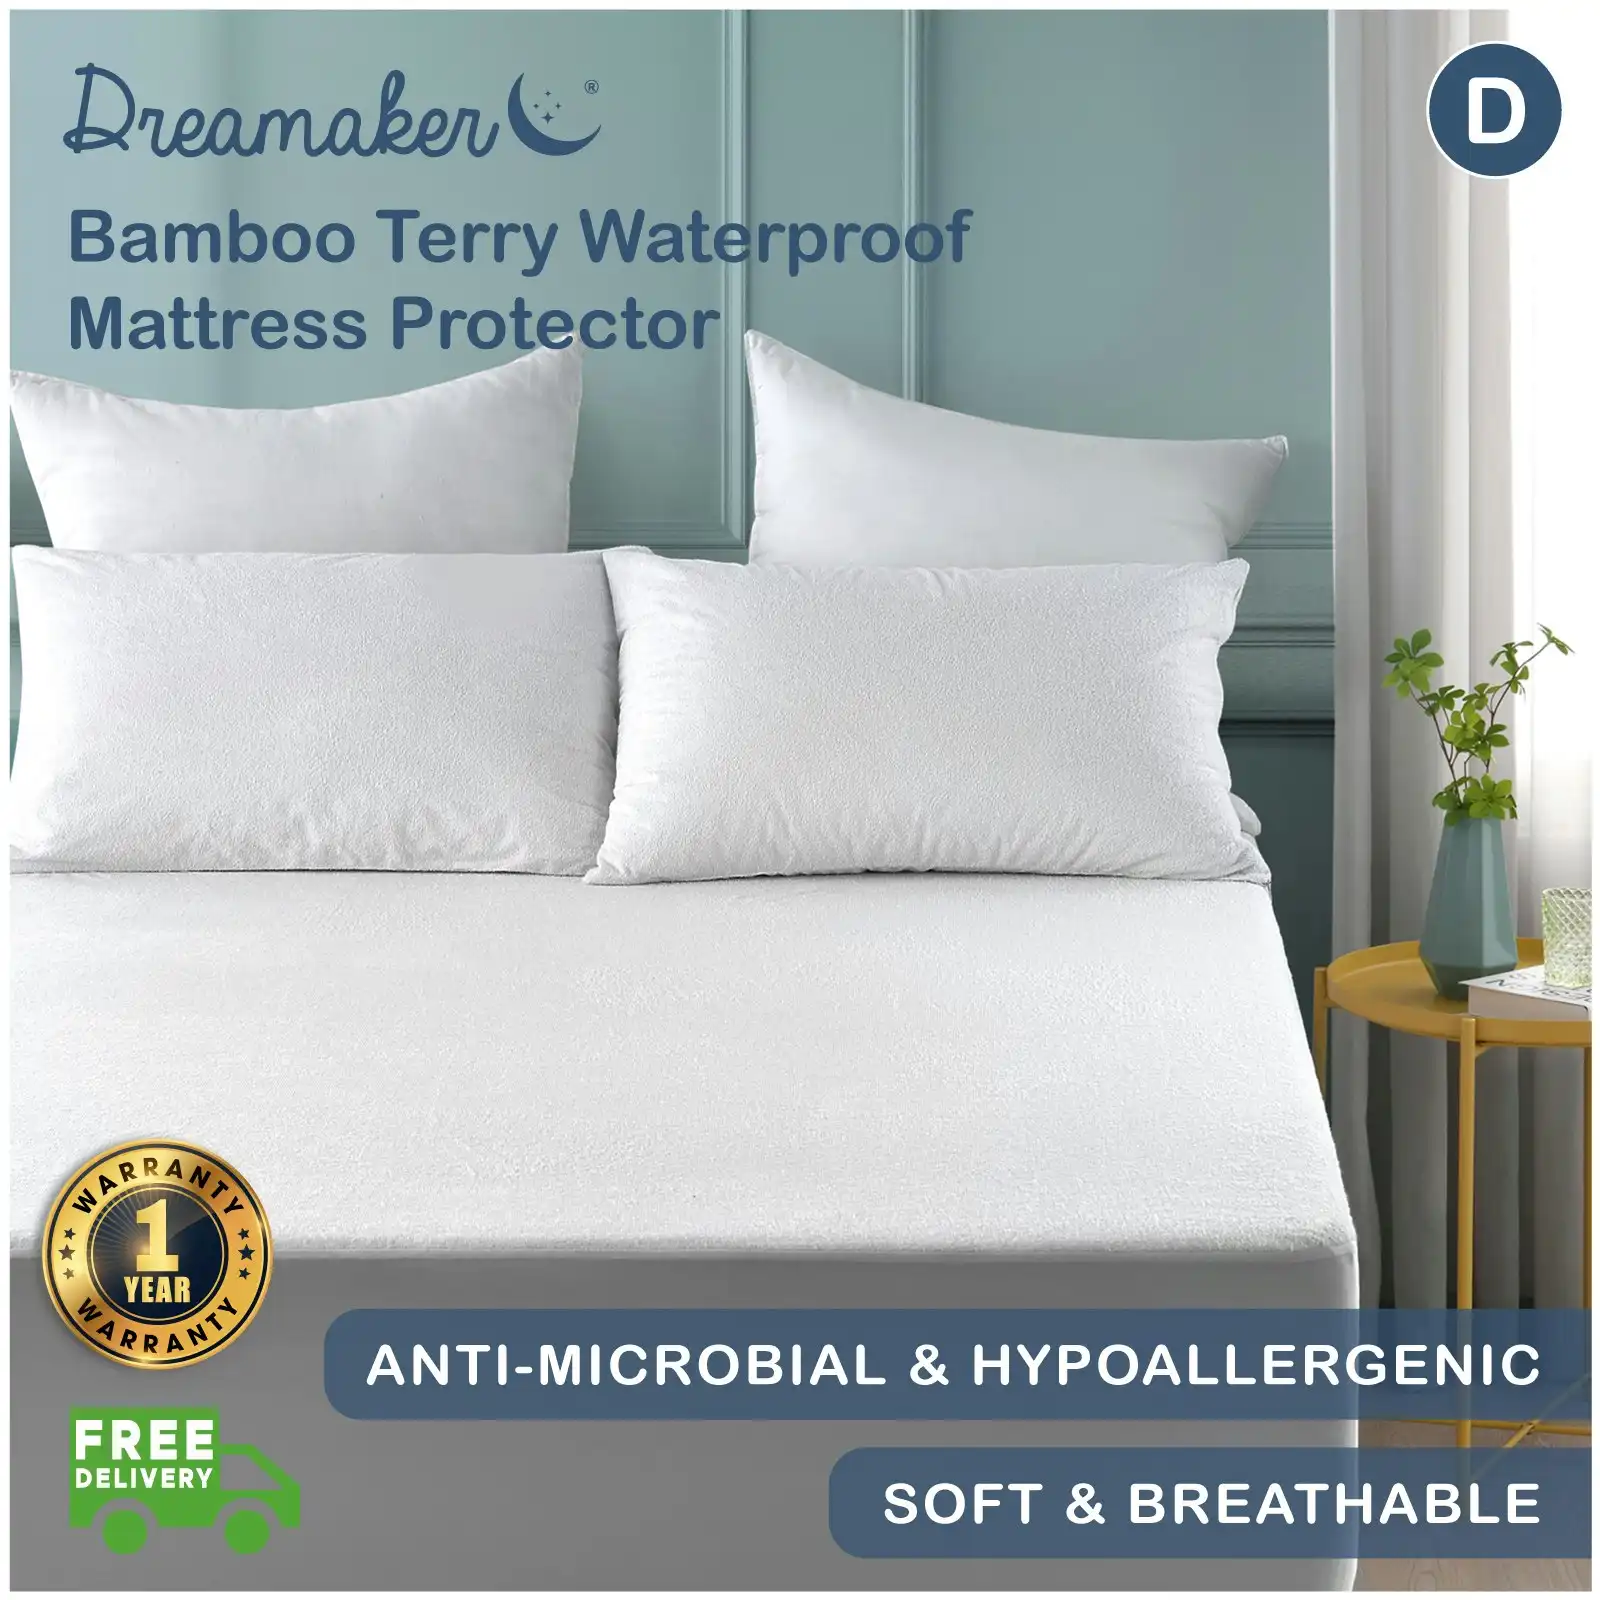 Dreamaker Bamboo Terry Waterproof Mattress Protector Double Bed